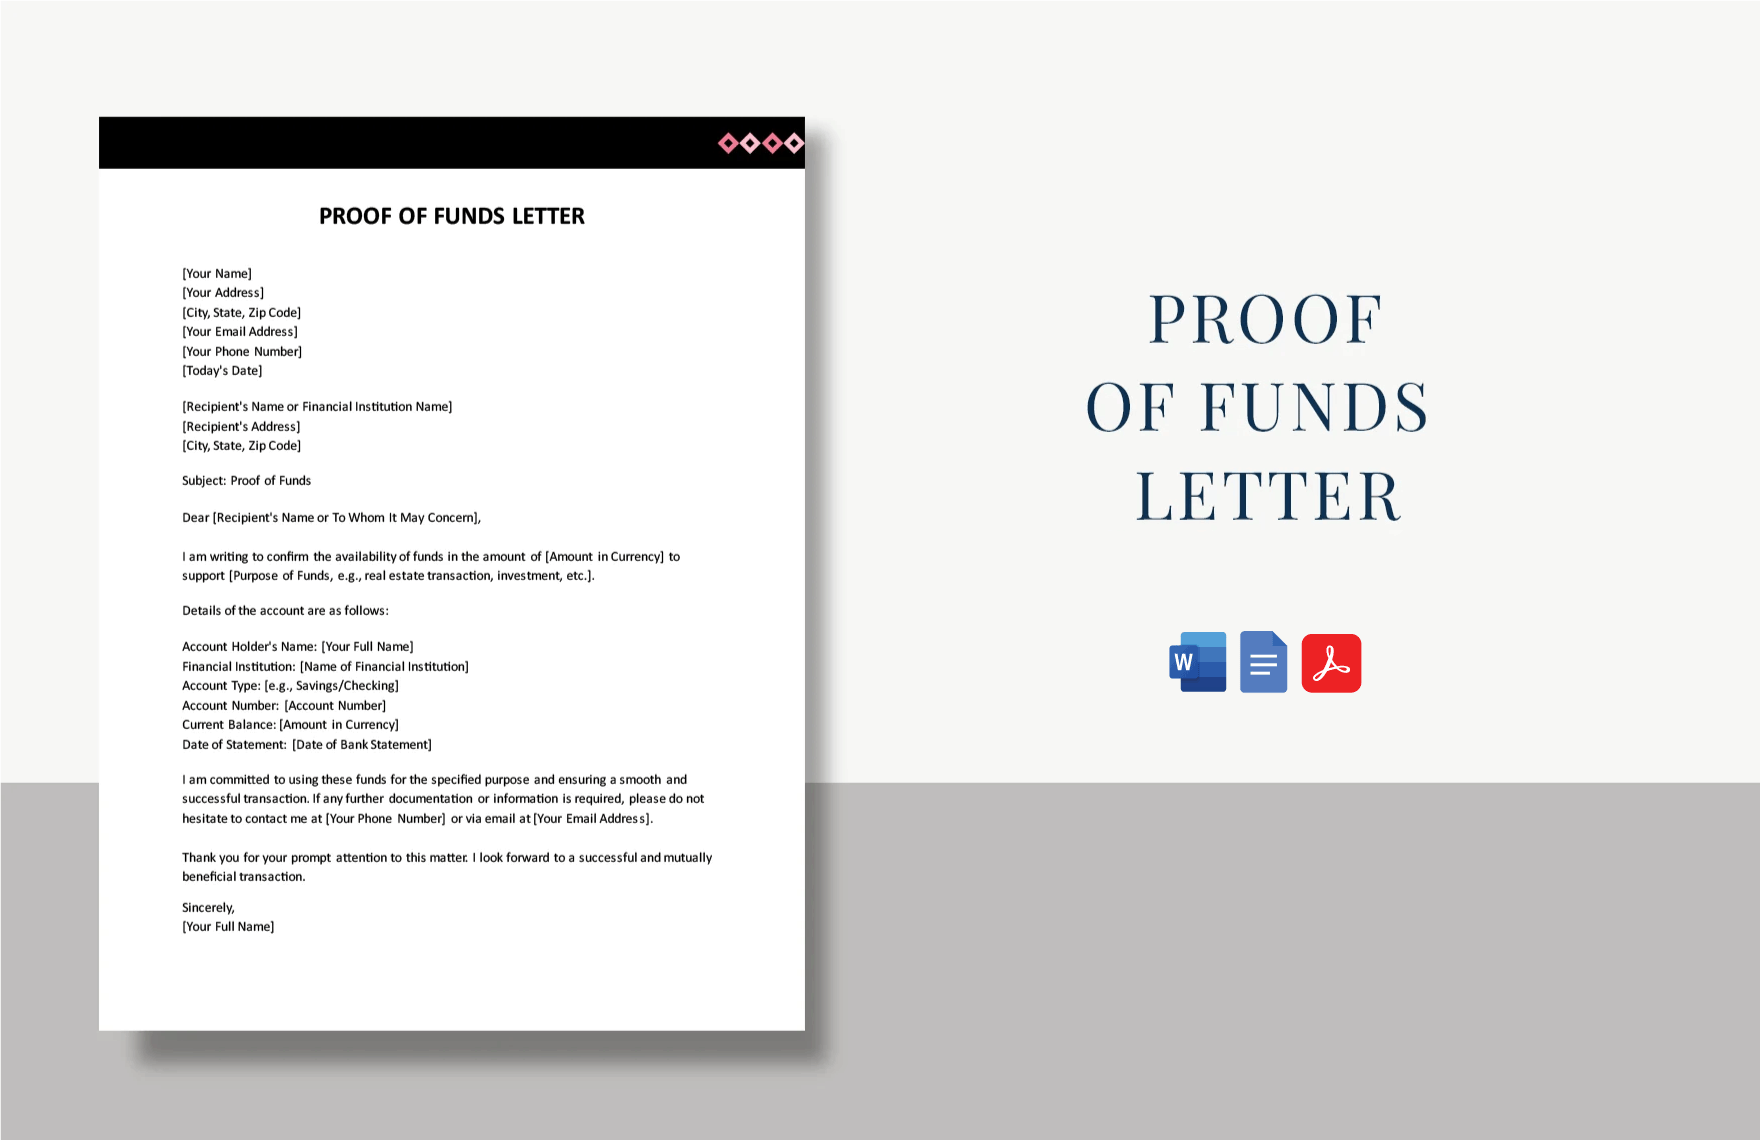 Proof 0f Funds Letter in Word, Google Docs, PDF